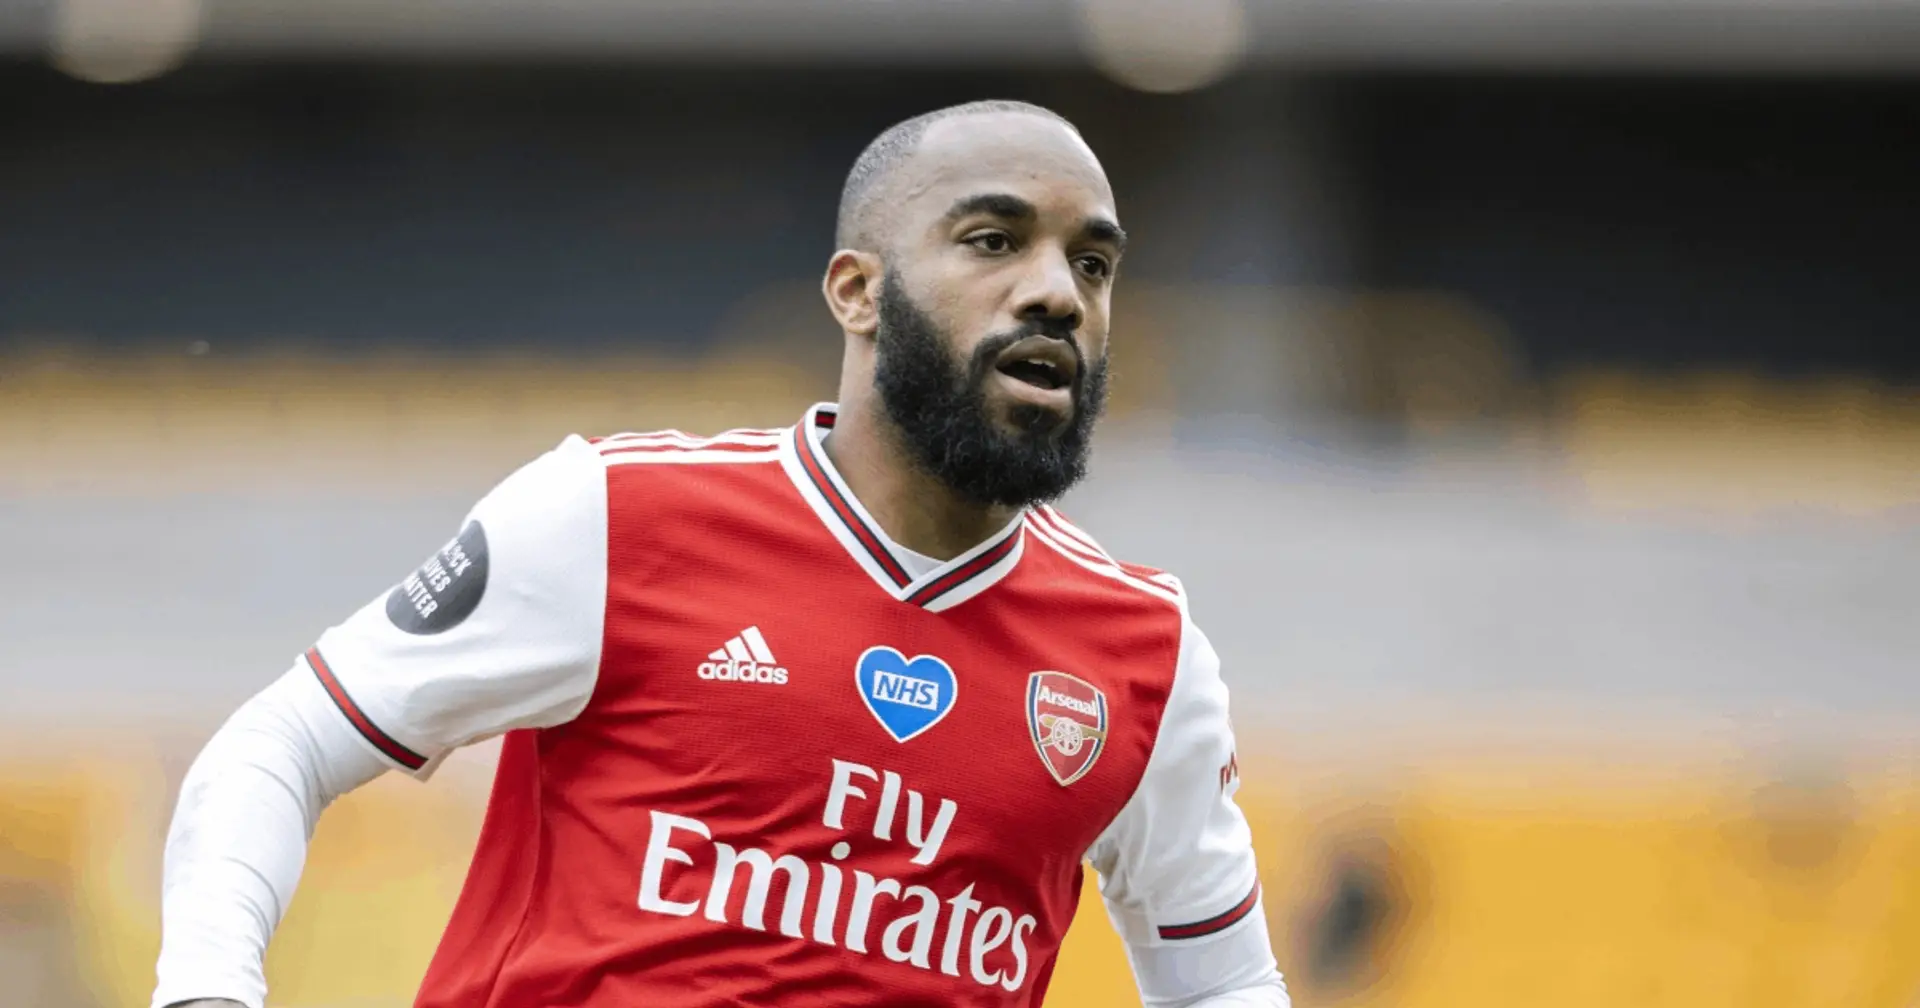 'We will see what happens': Mikel Arteta uncertain over Alex Lacazette's long-term future at Arsenal